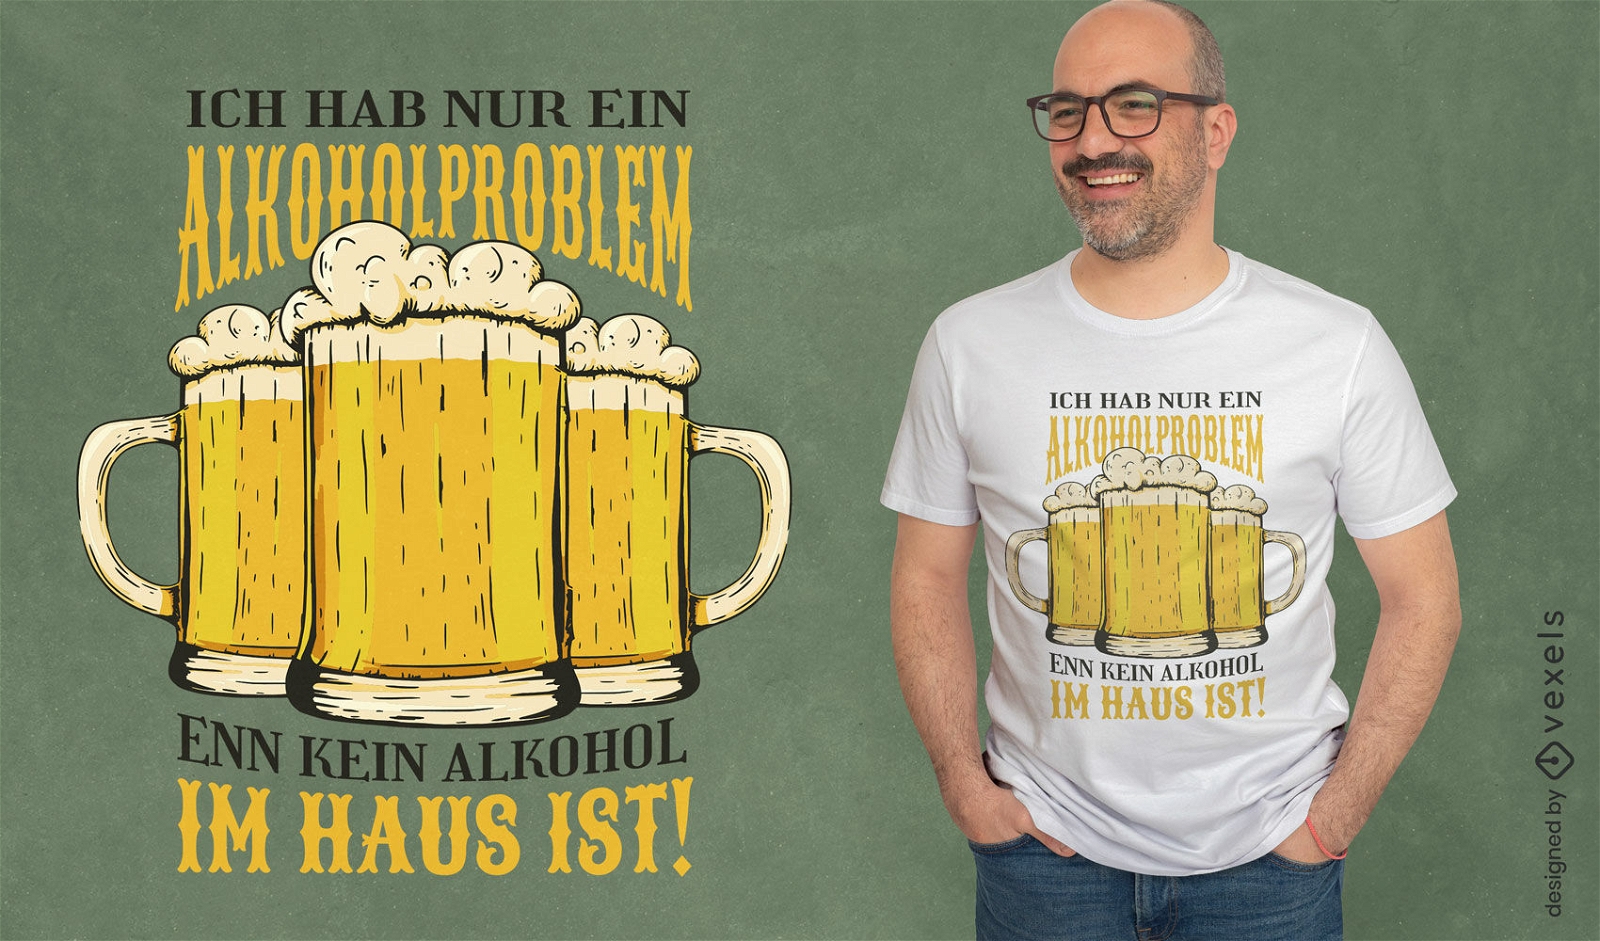 Funny beer alcohol quote t-shirt design